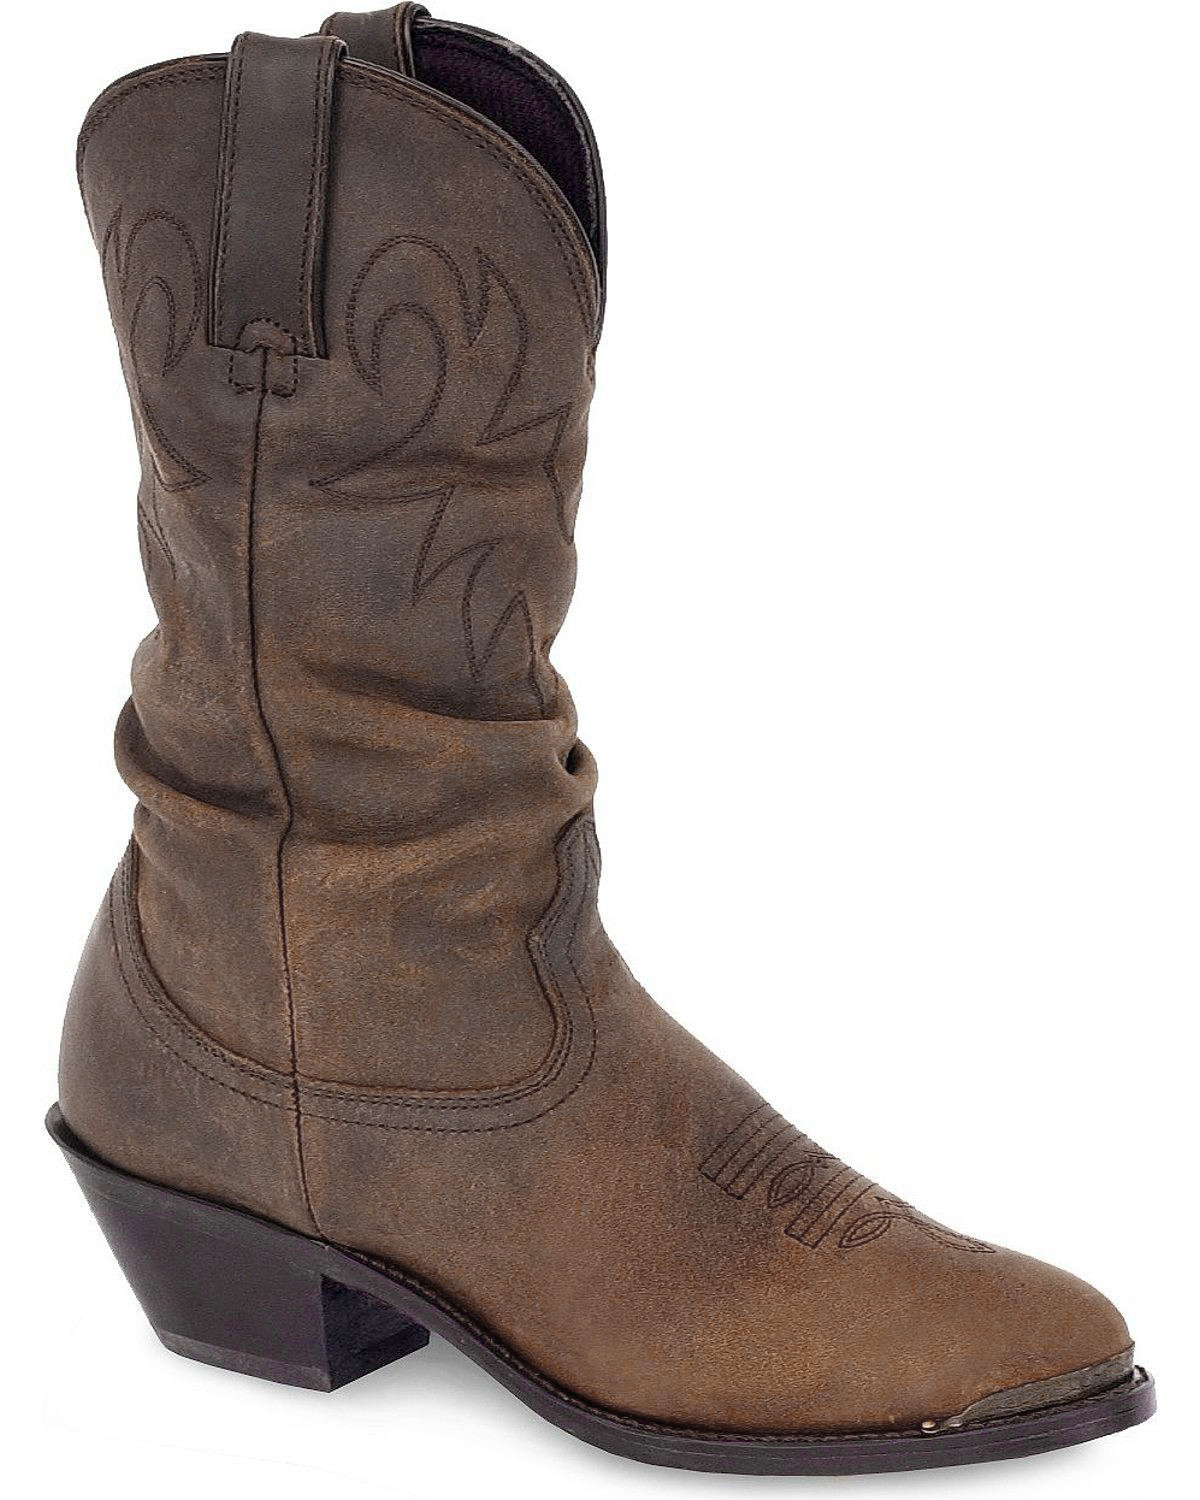 Durango Slouch Cowboy Boots - Country Outfitter